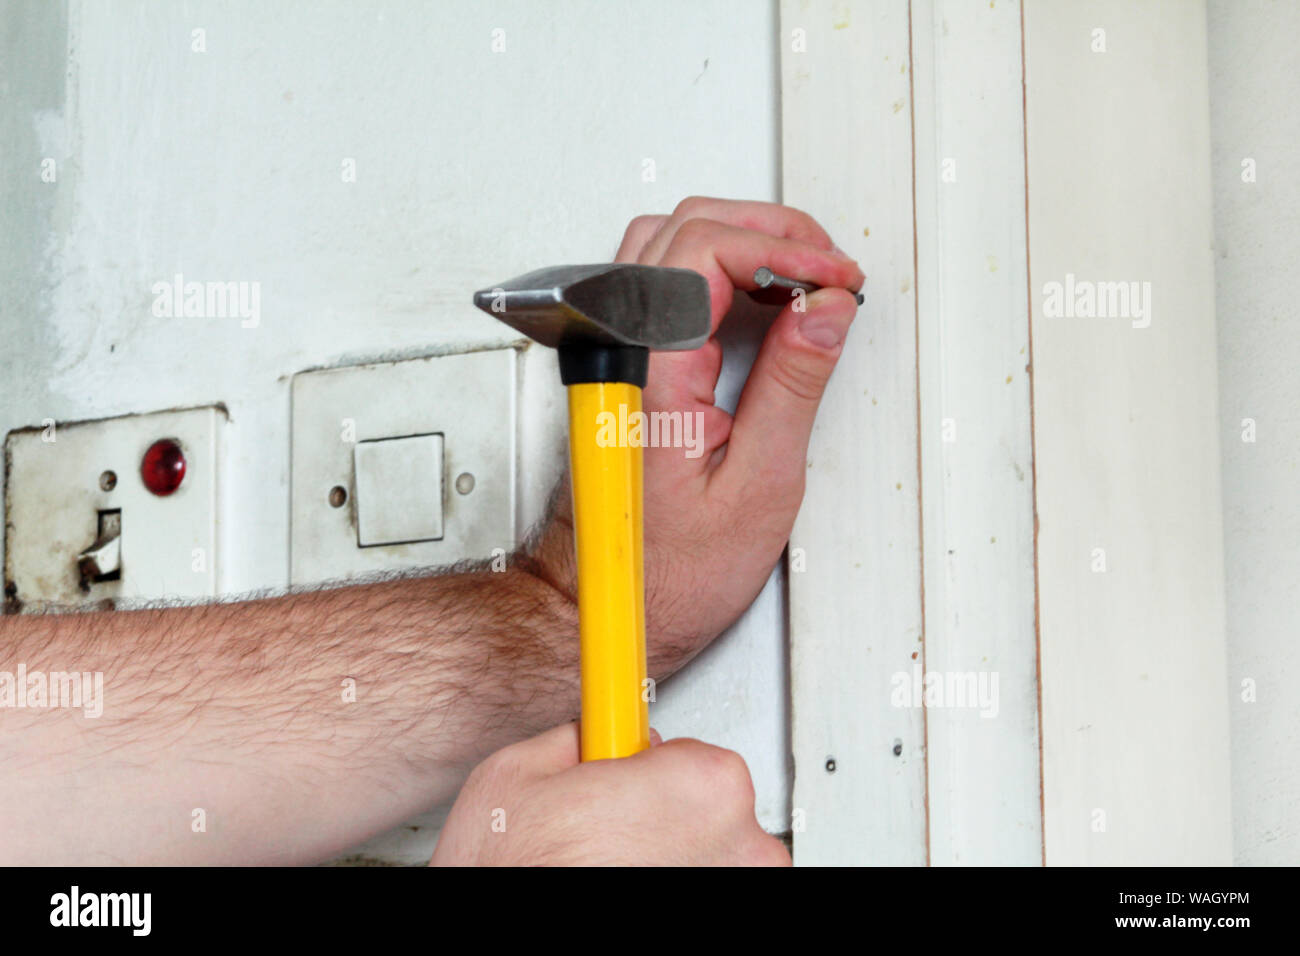 Construction worker and handyman working on renovation work. Builder with  yellow hammer strikes and nails a nail into wooden wall of kitchen door  Stock Photo - Alamy